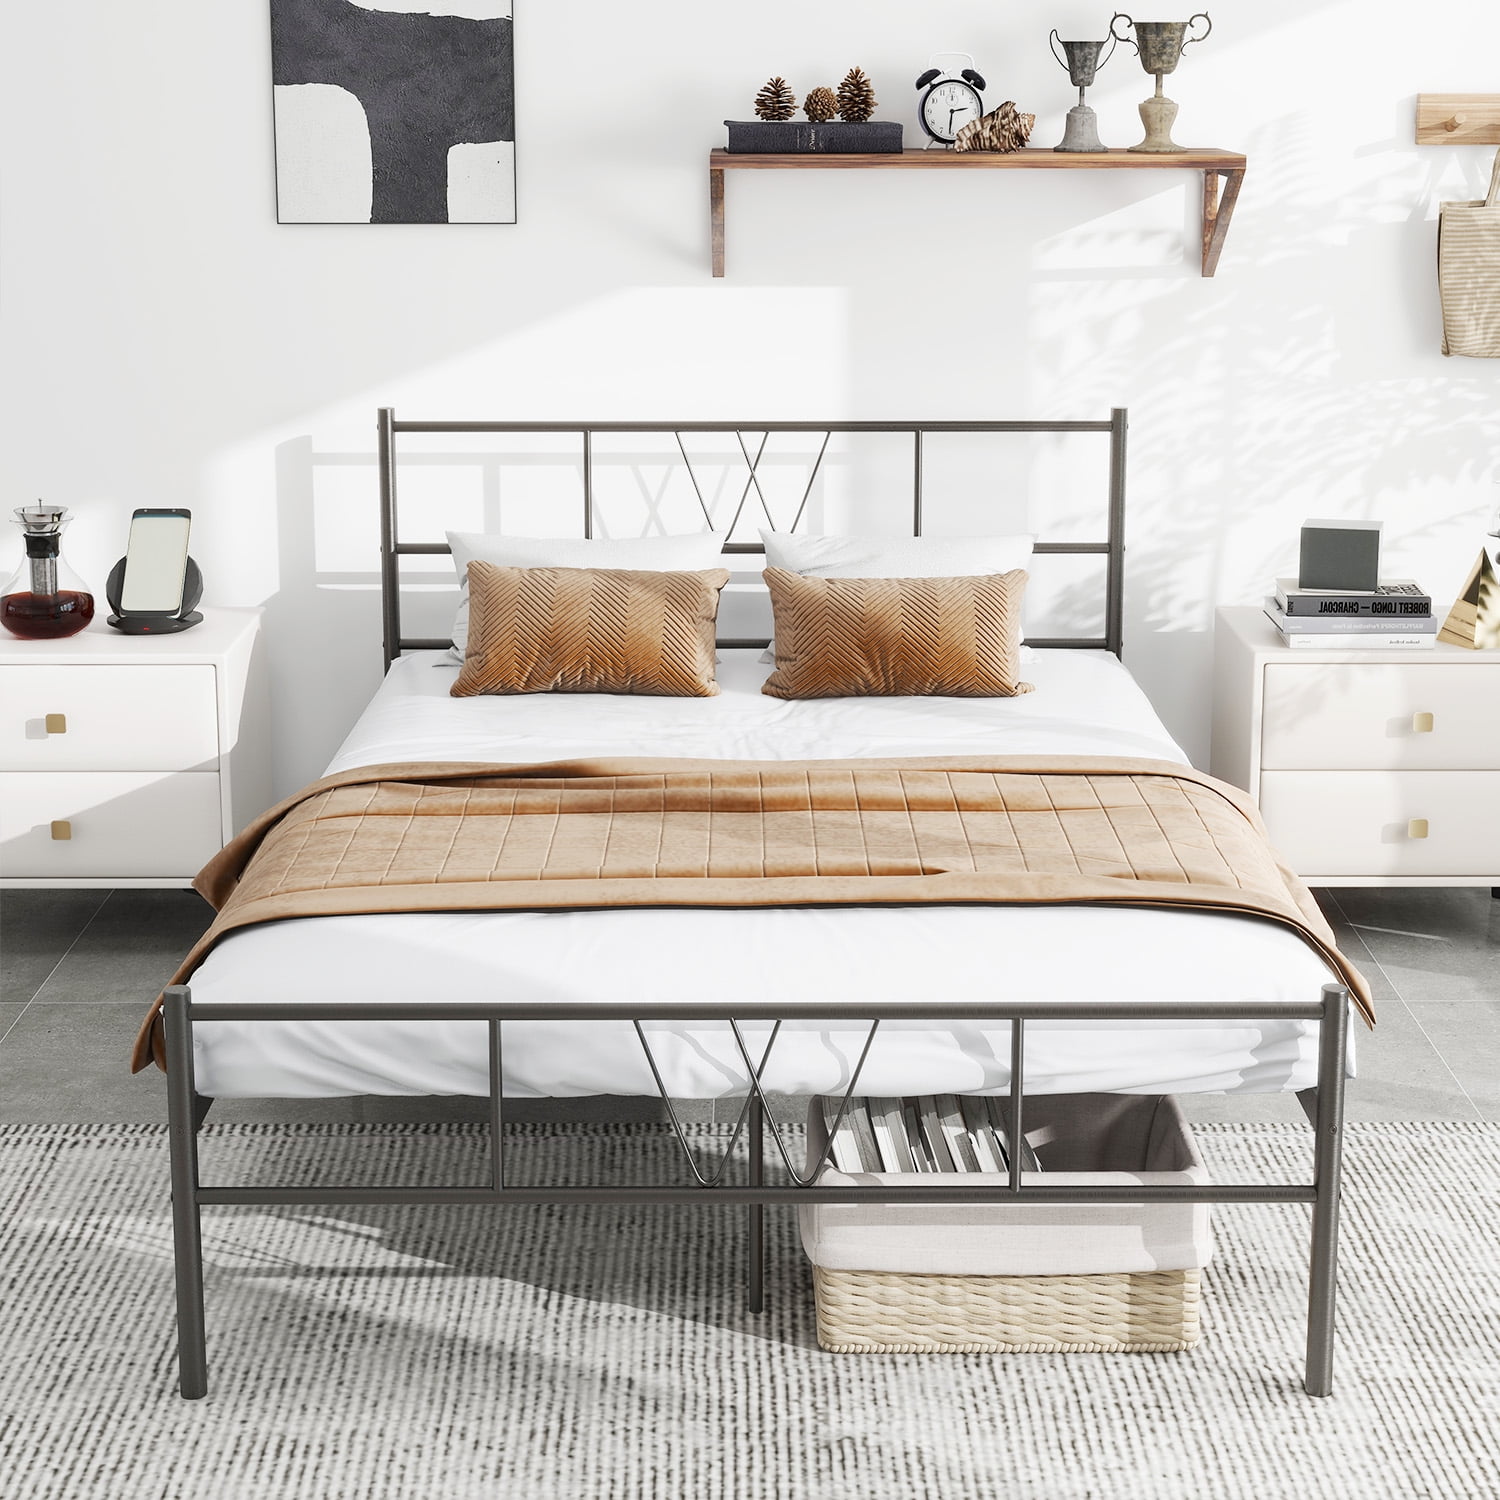 Smiaoer Full Size Metal Platform Bed Frame with Headboard and Footboard, No Box Spring Needed